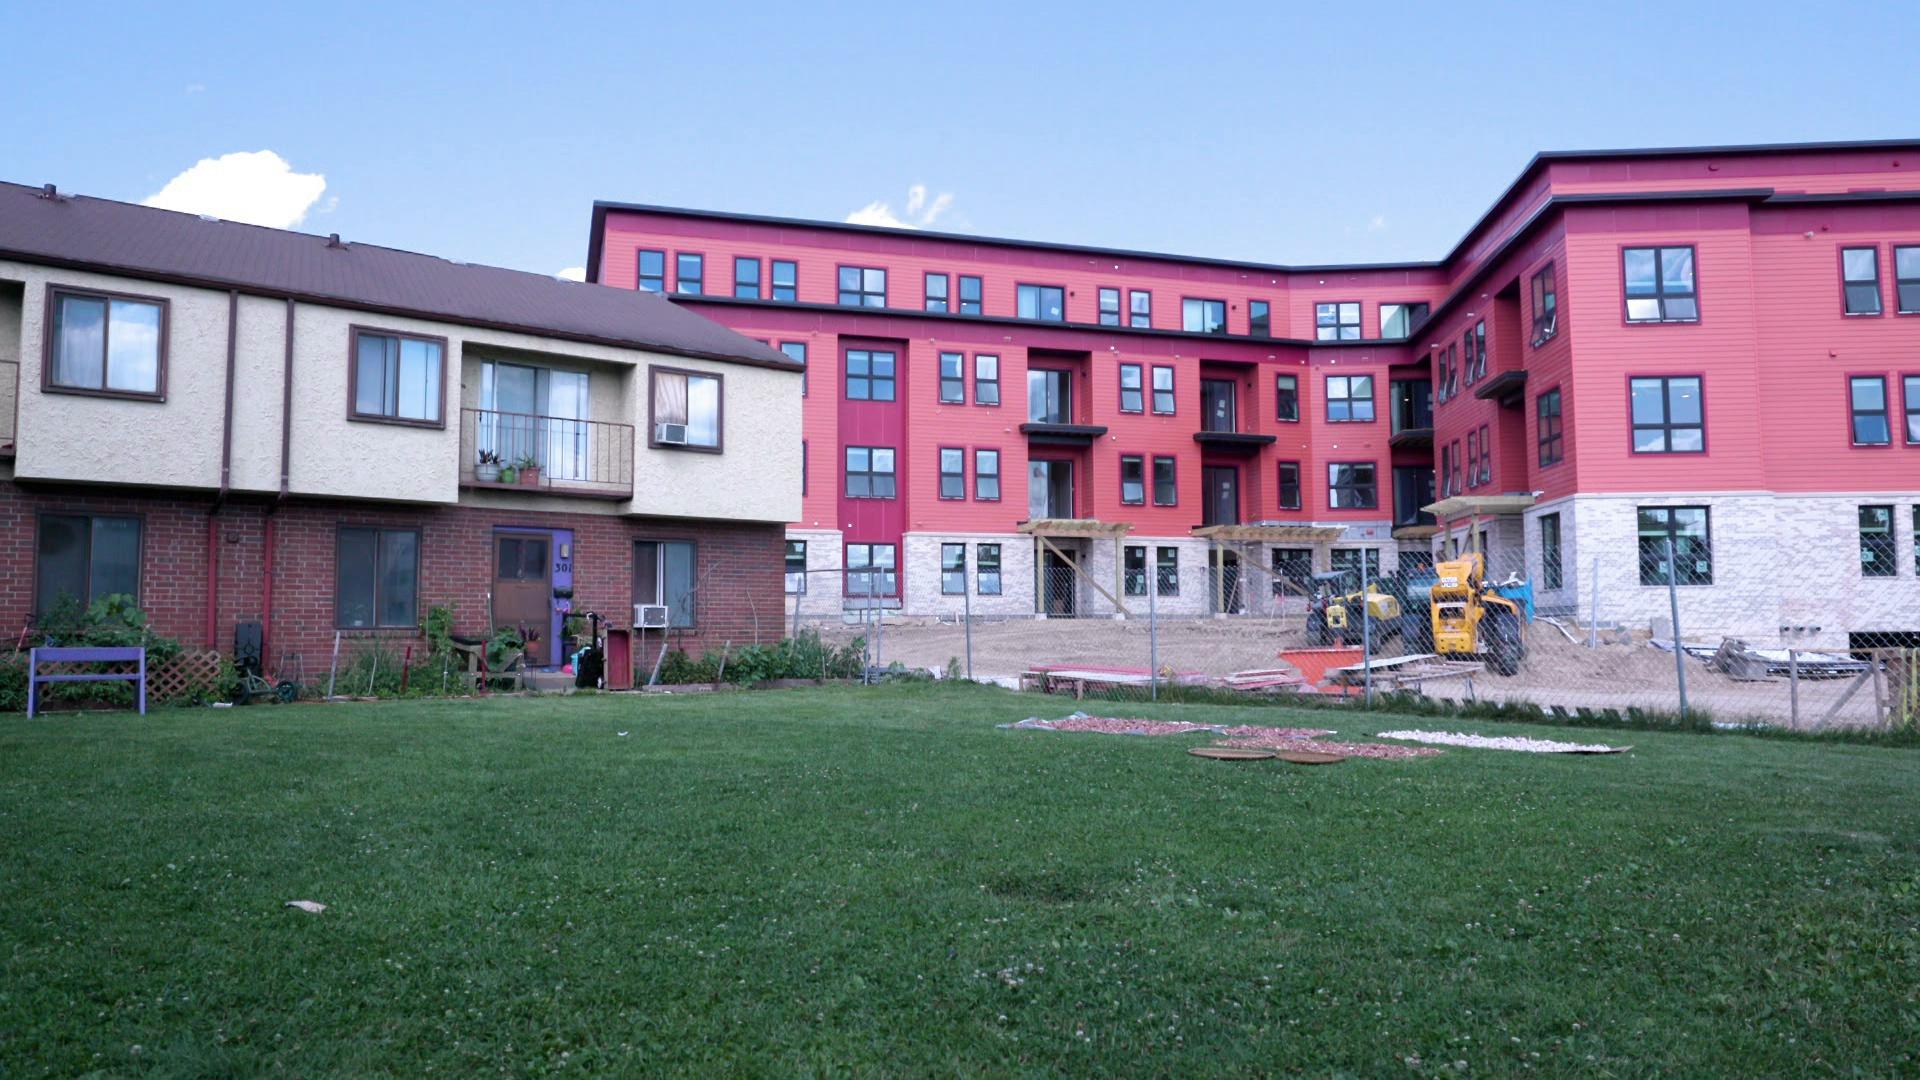 Redeveloping Madison’s Bayview community with design justice